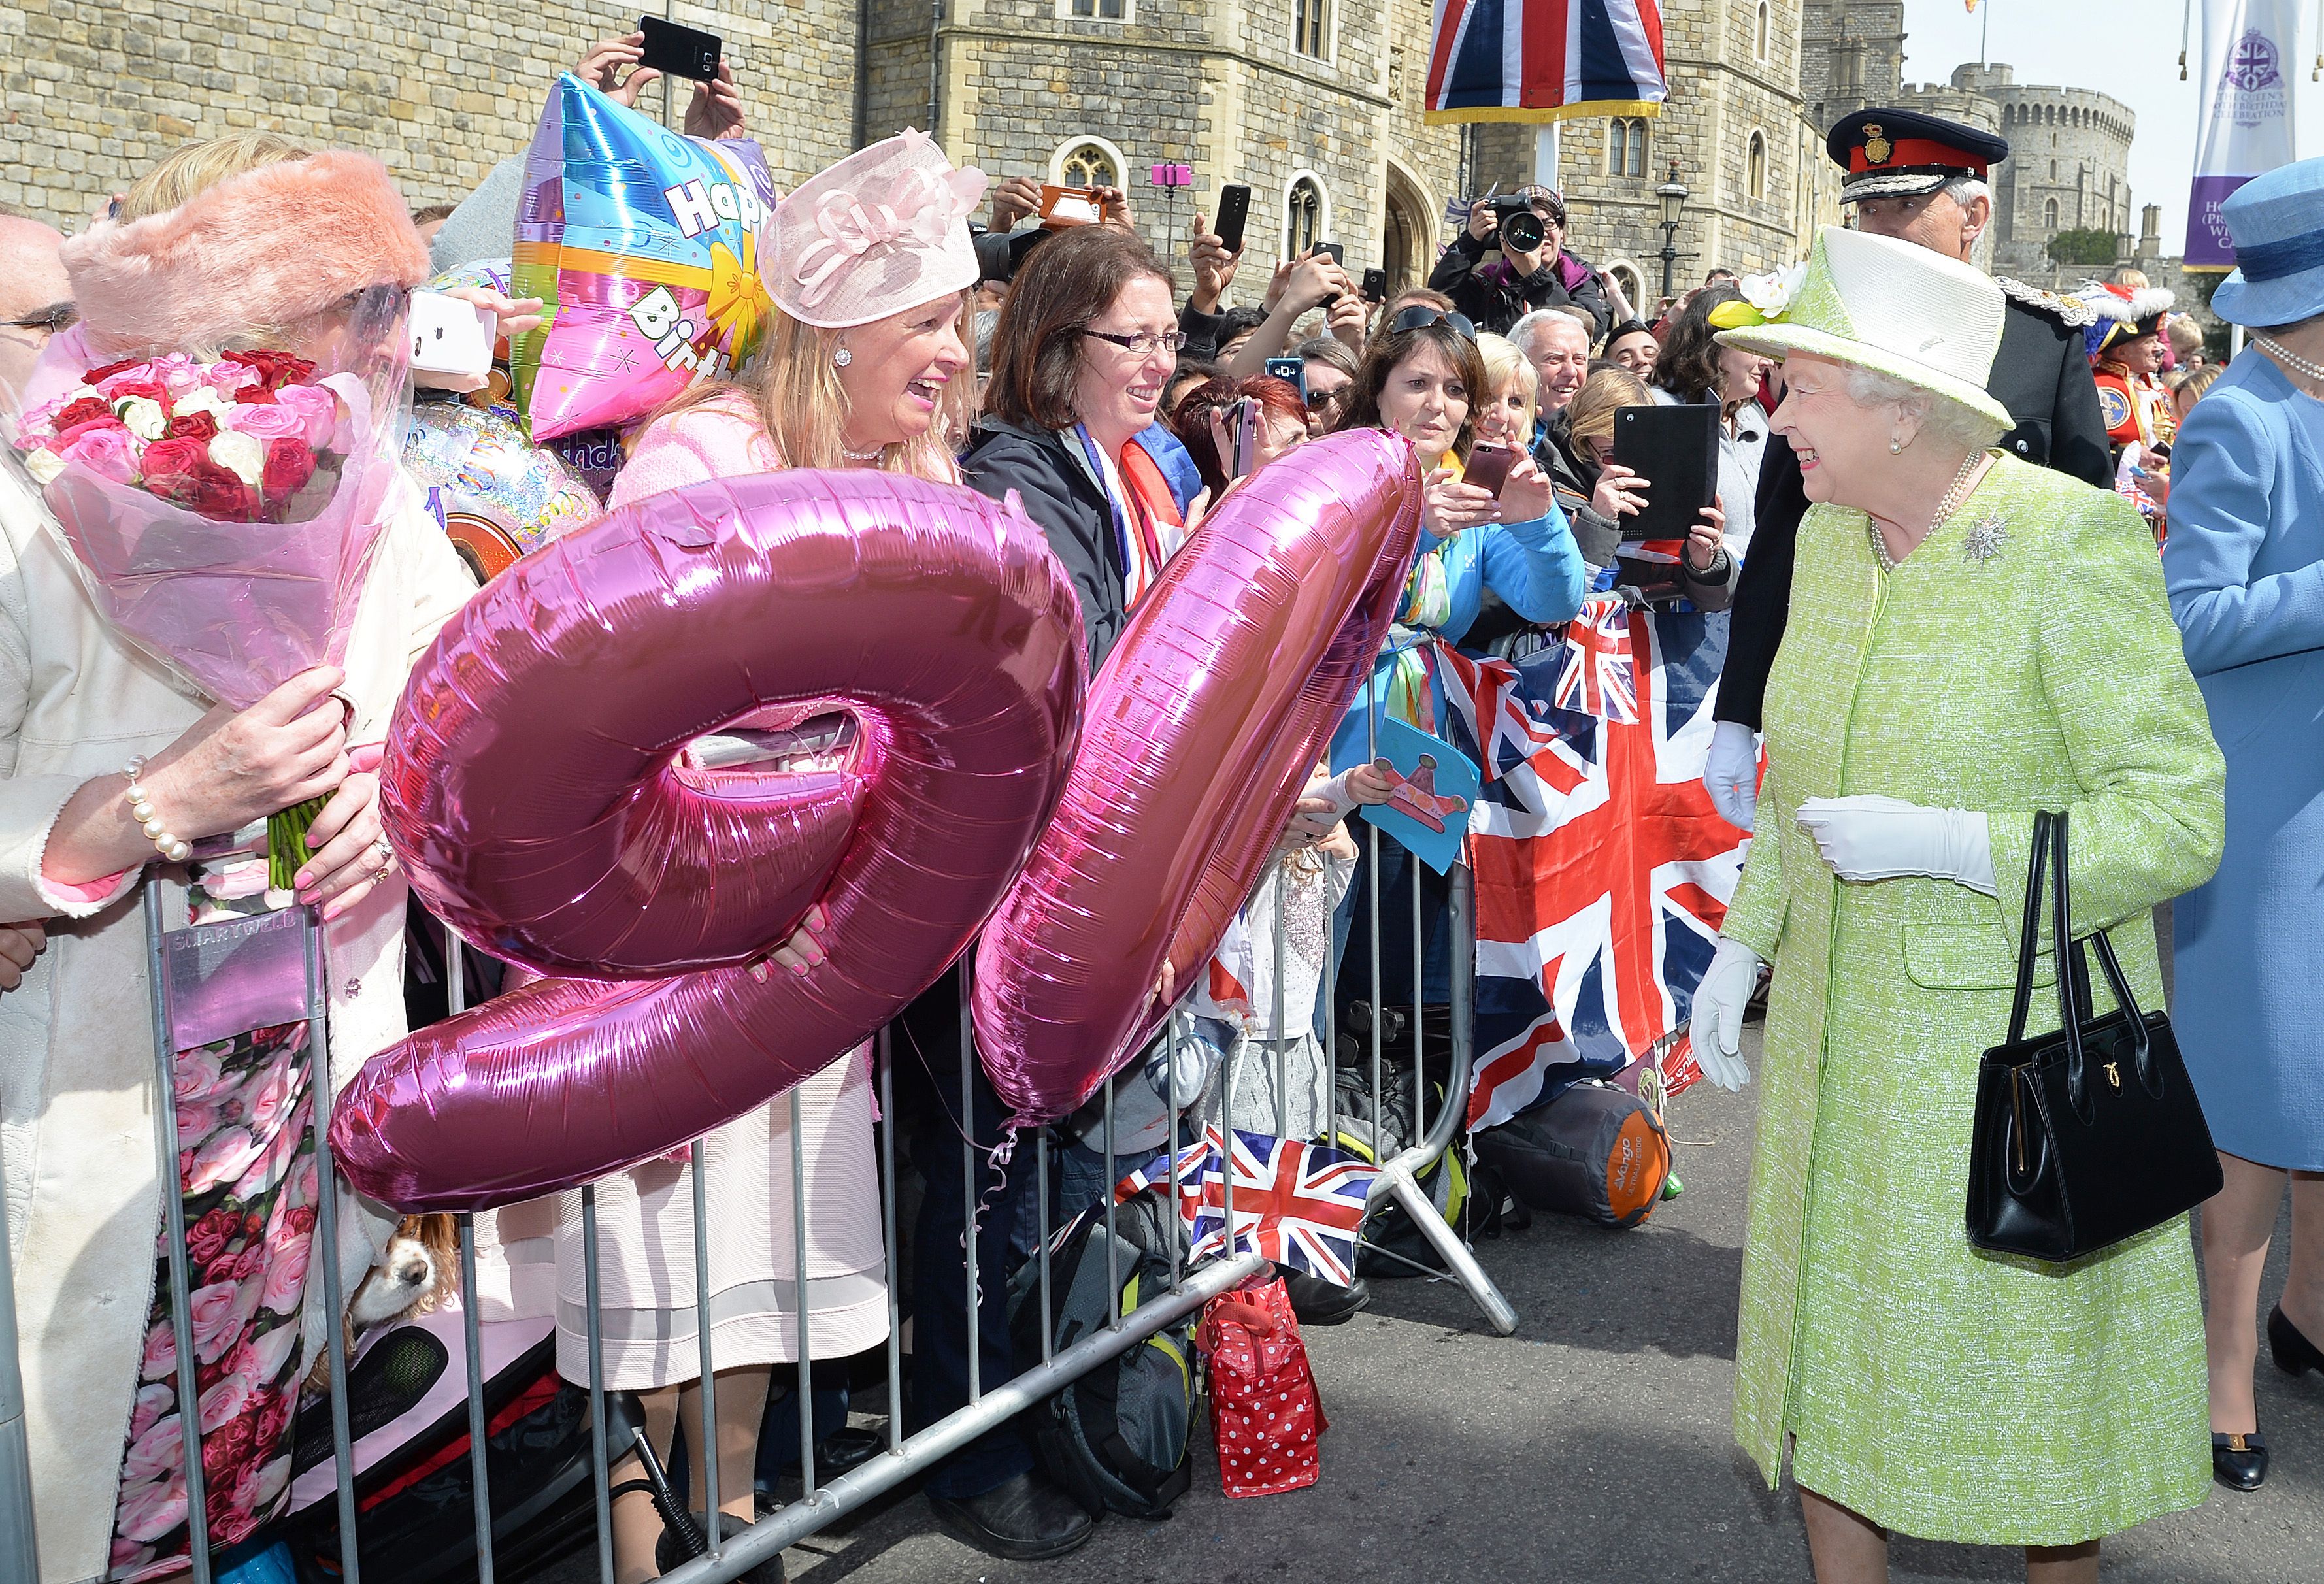 Queen Elizabeth II greets well-wishers during a 'walkabout' on her 90th birthday in Windsor in 2016